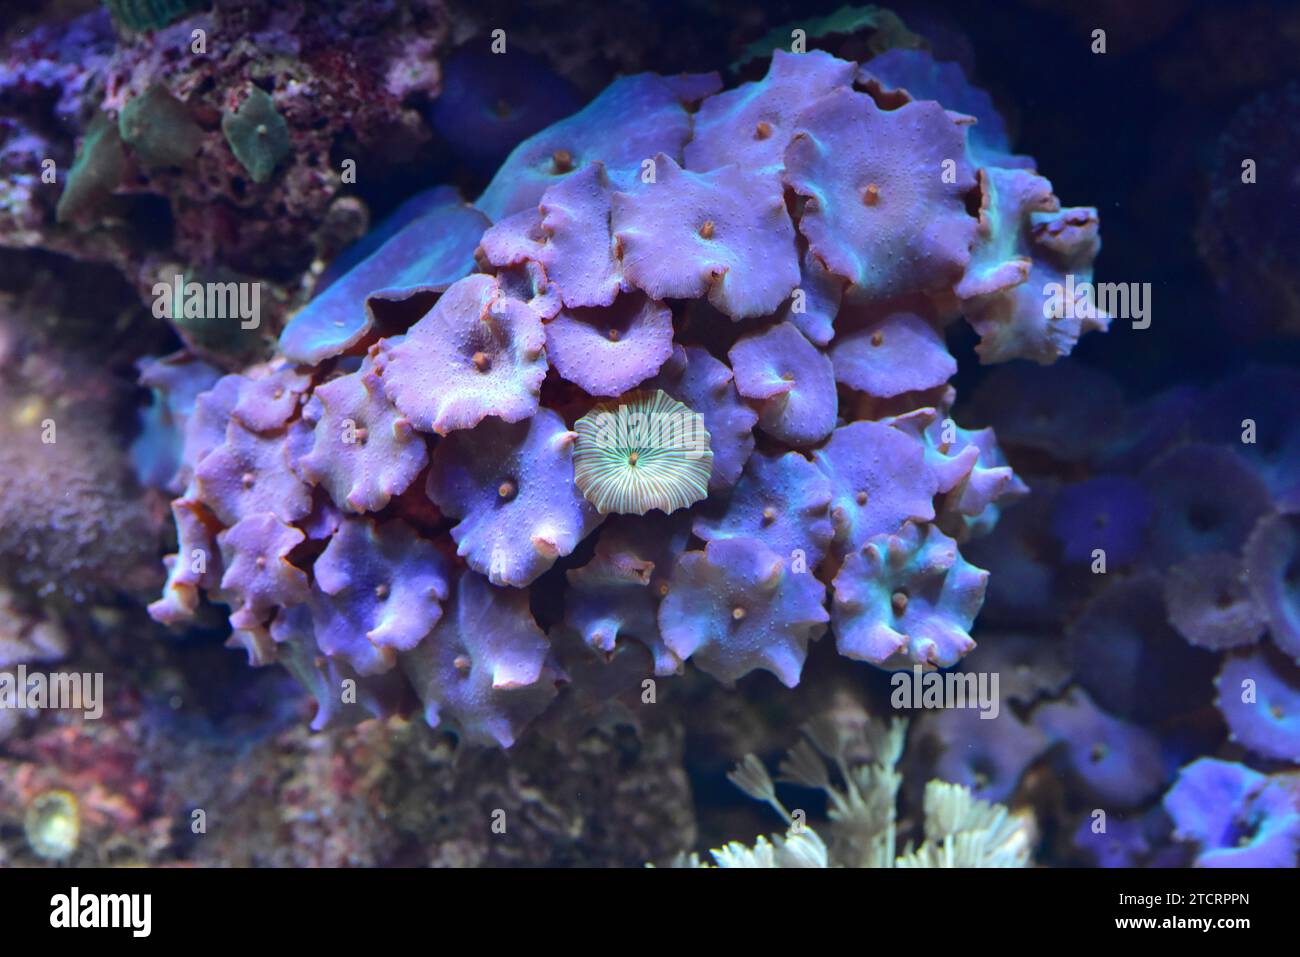 Disc anemone or mushroom anemone (Discosoma sp. or Actinodiscus sp.) are soft corals formed by individuals polyps that grows in colonies. Stock Photo